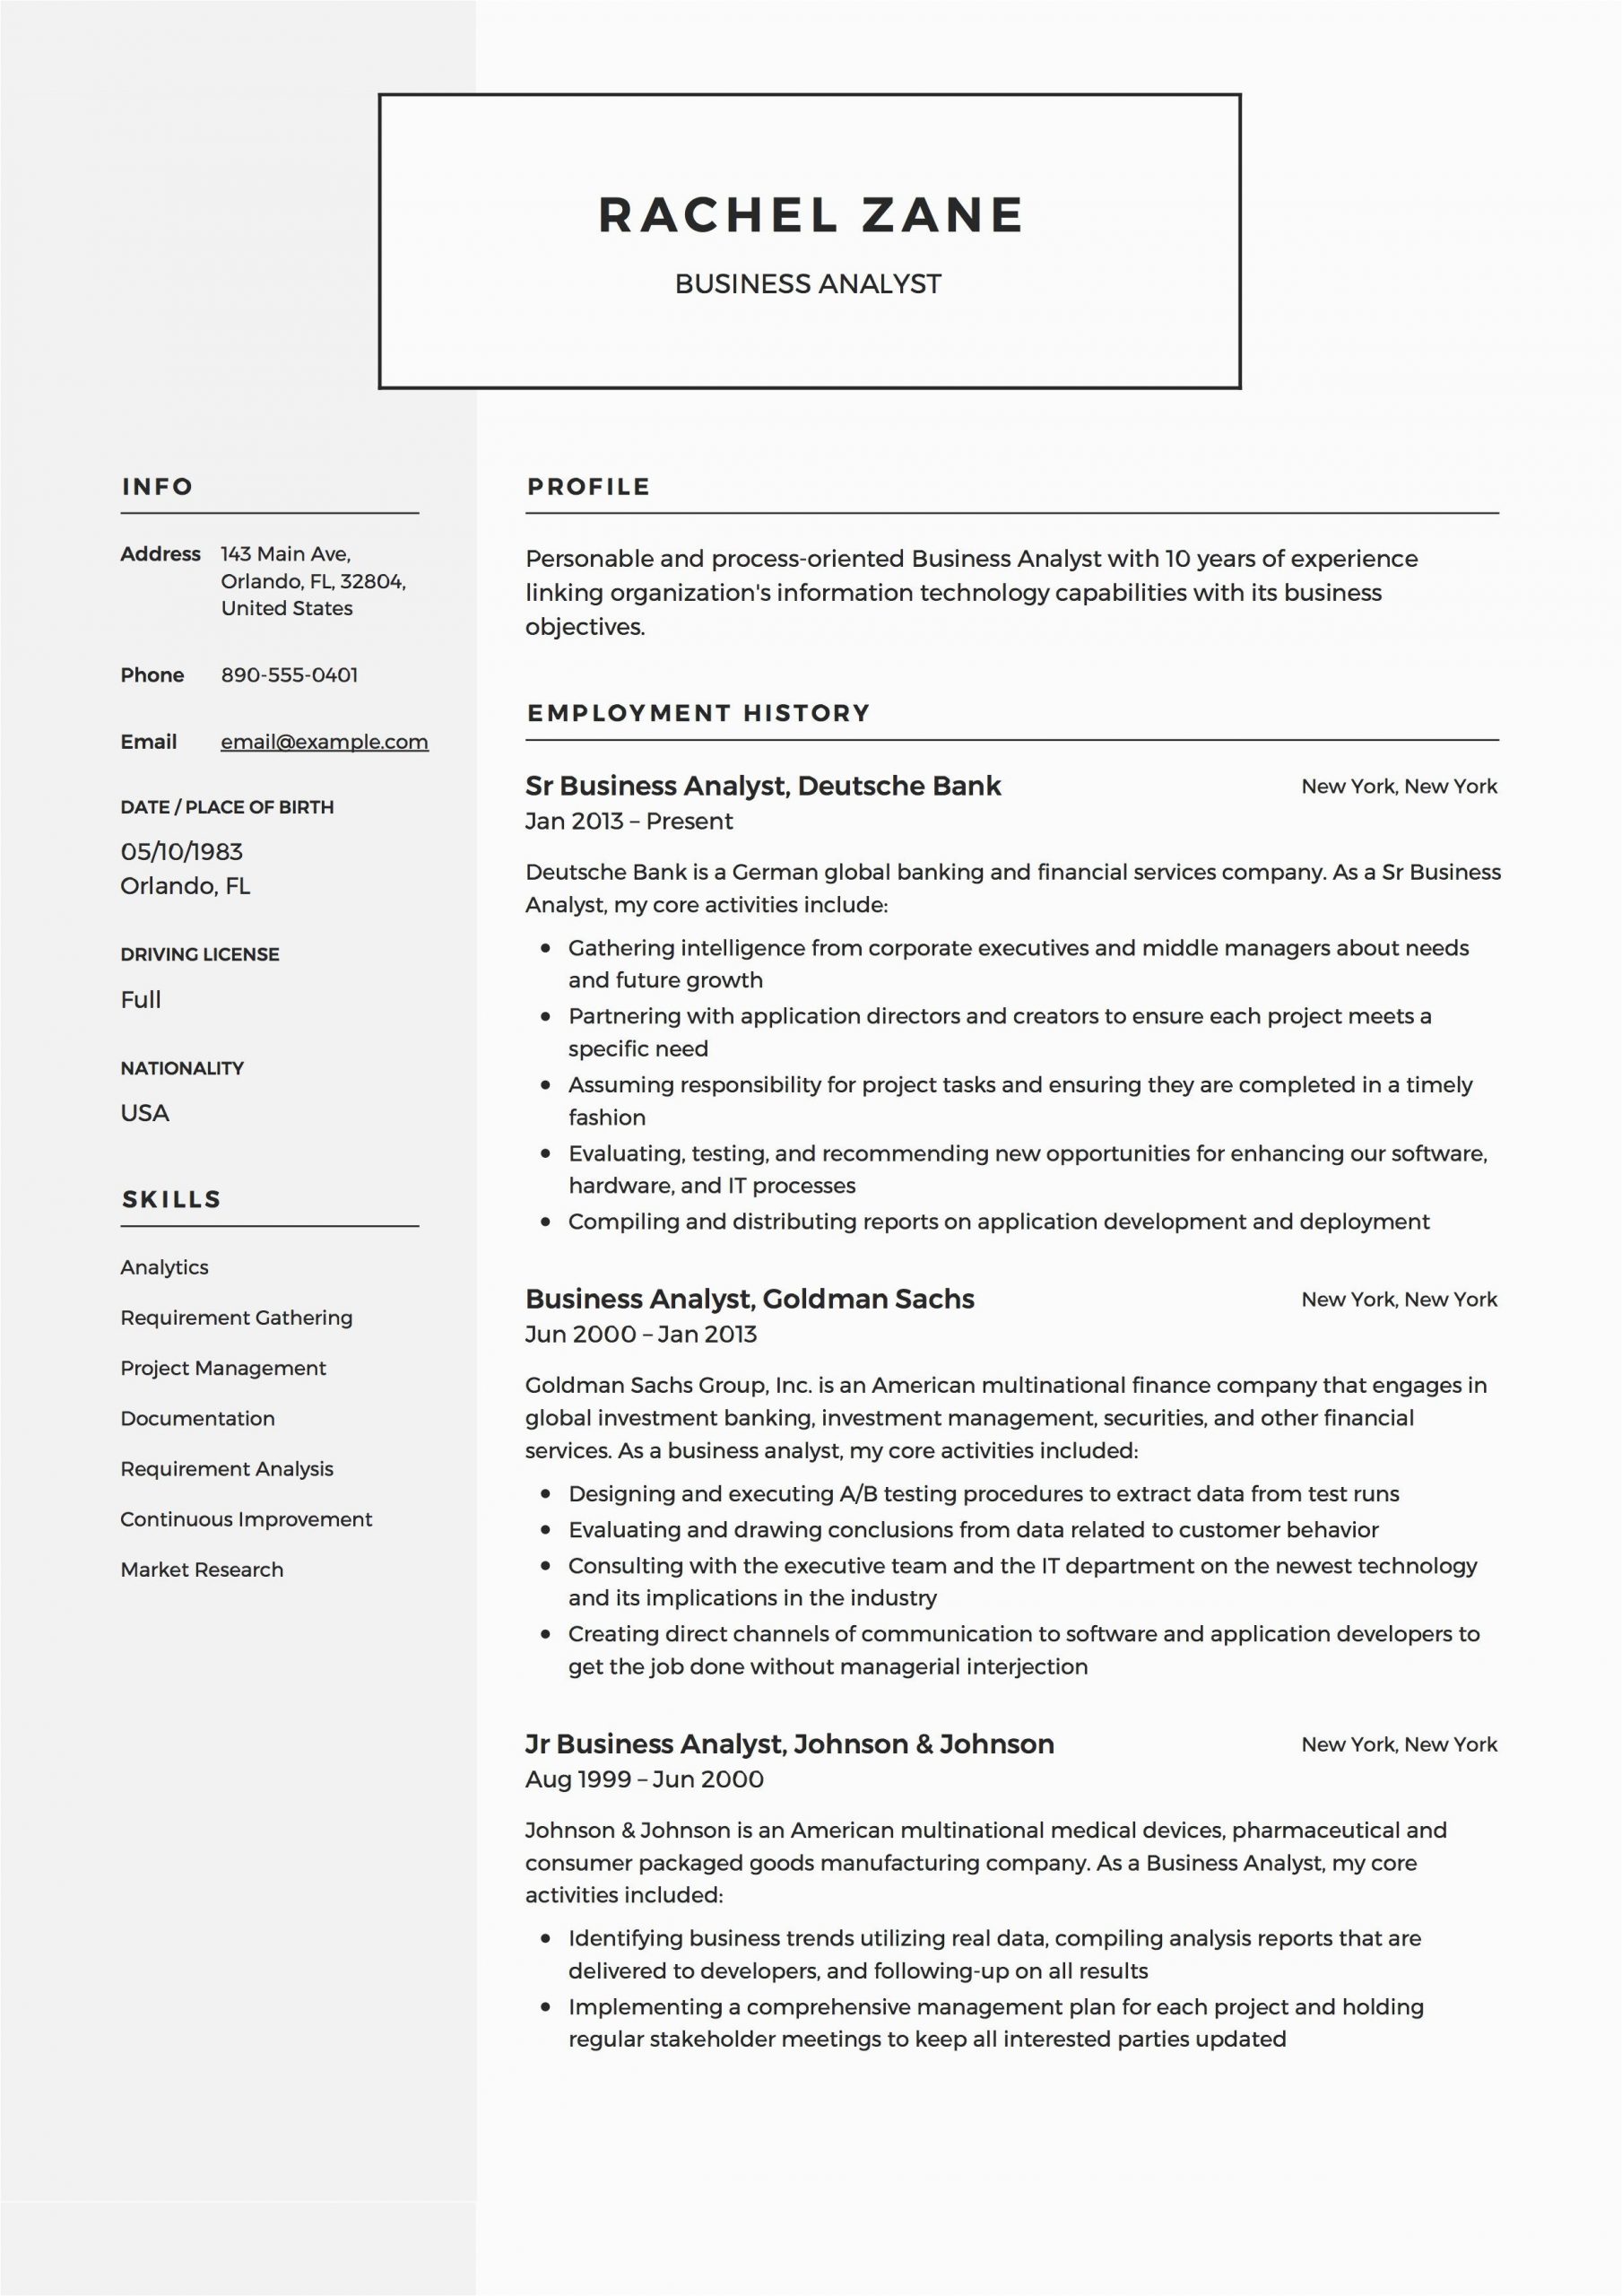 Business Analyst Resume Templates Free Download Business Analyst Resume Sample Template Example Cv